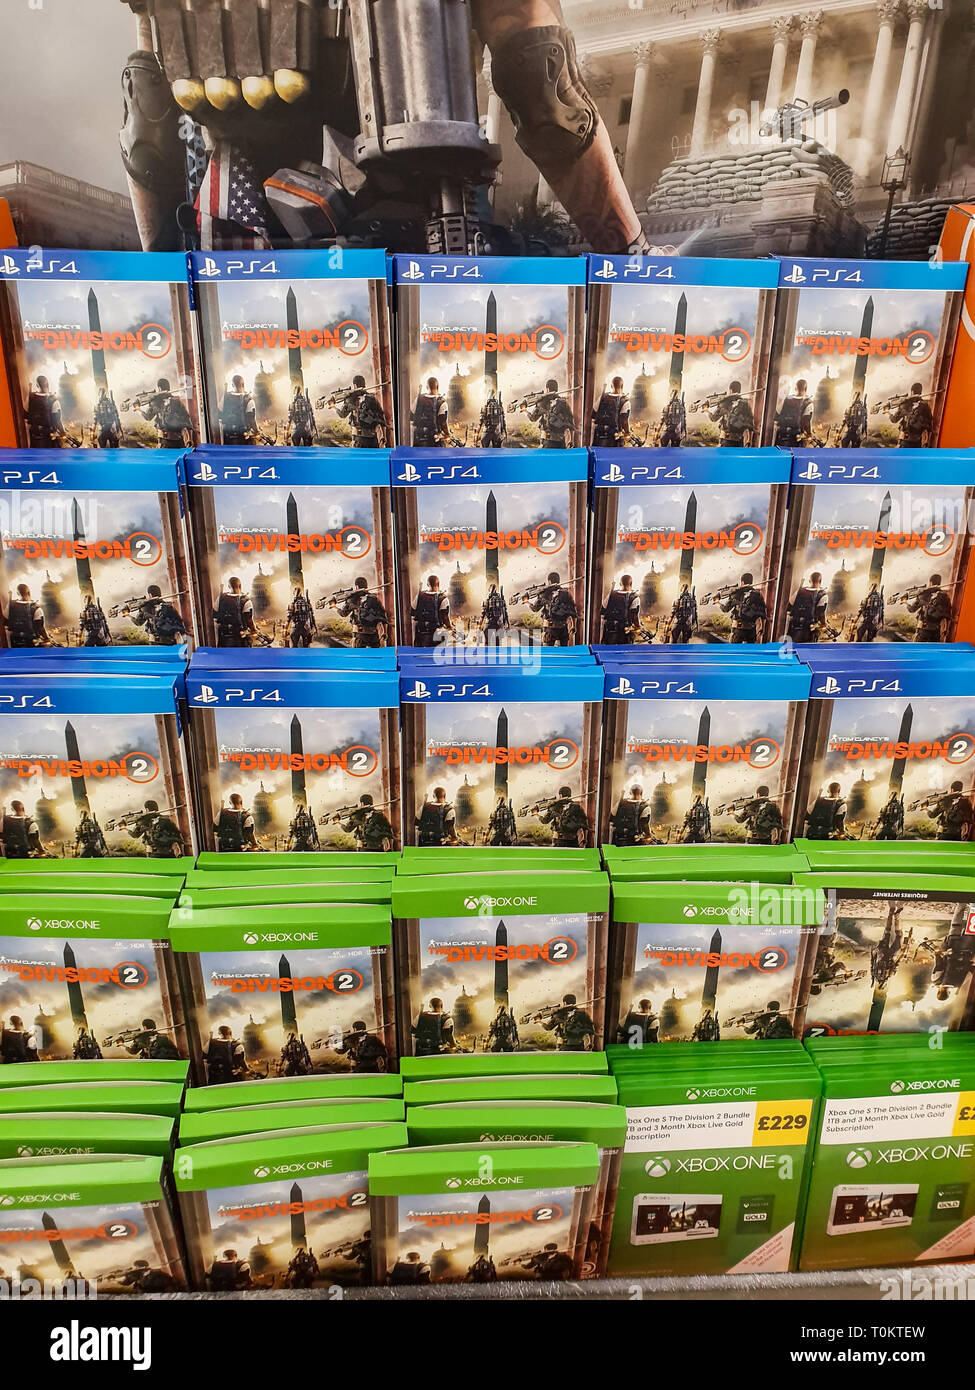 SHEFFIELD, UK - 20TH MARCH 2019: Division 2 for sale in Tesco for both the XBox  One and Playstation 4 Stock Photo - Alamy